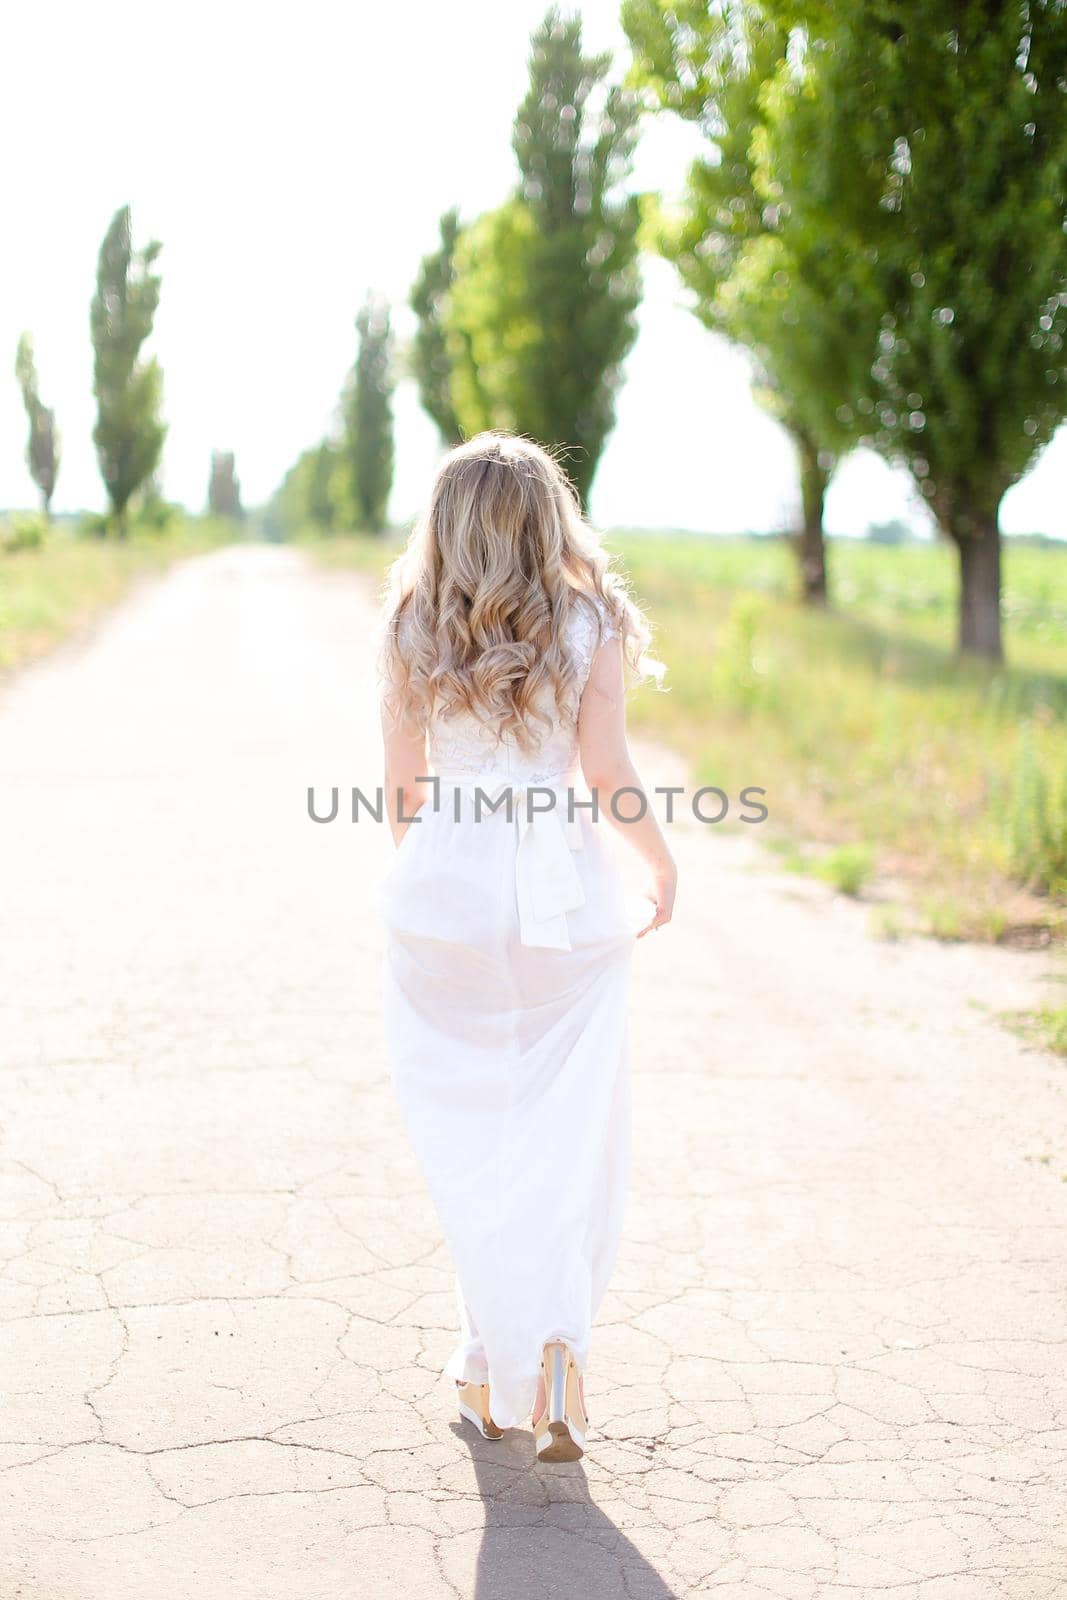 Back view of blonde bride wearing white dress walking on road. Concept of wedding photo session and fiancee.